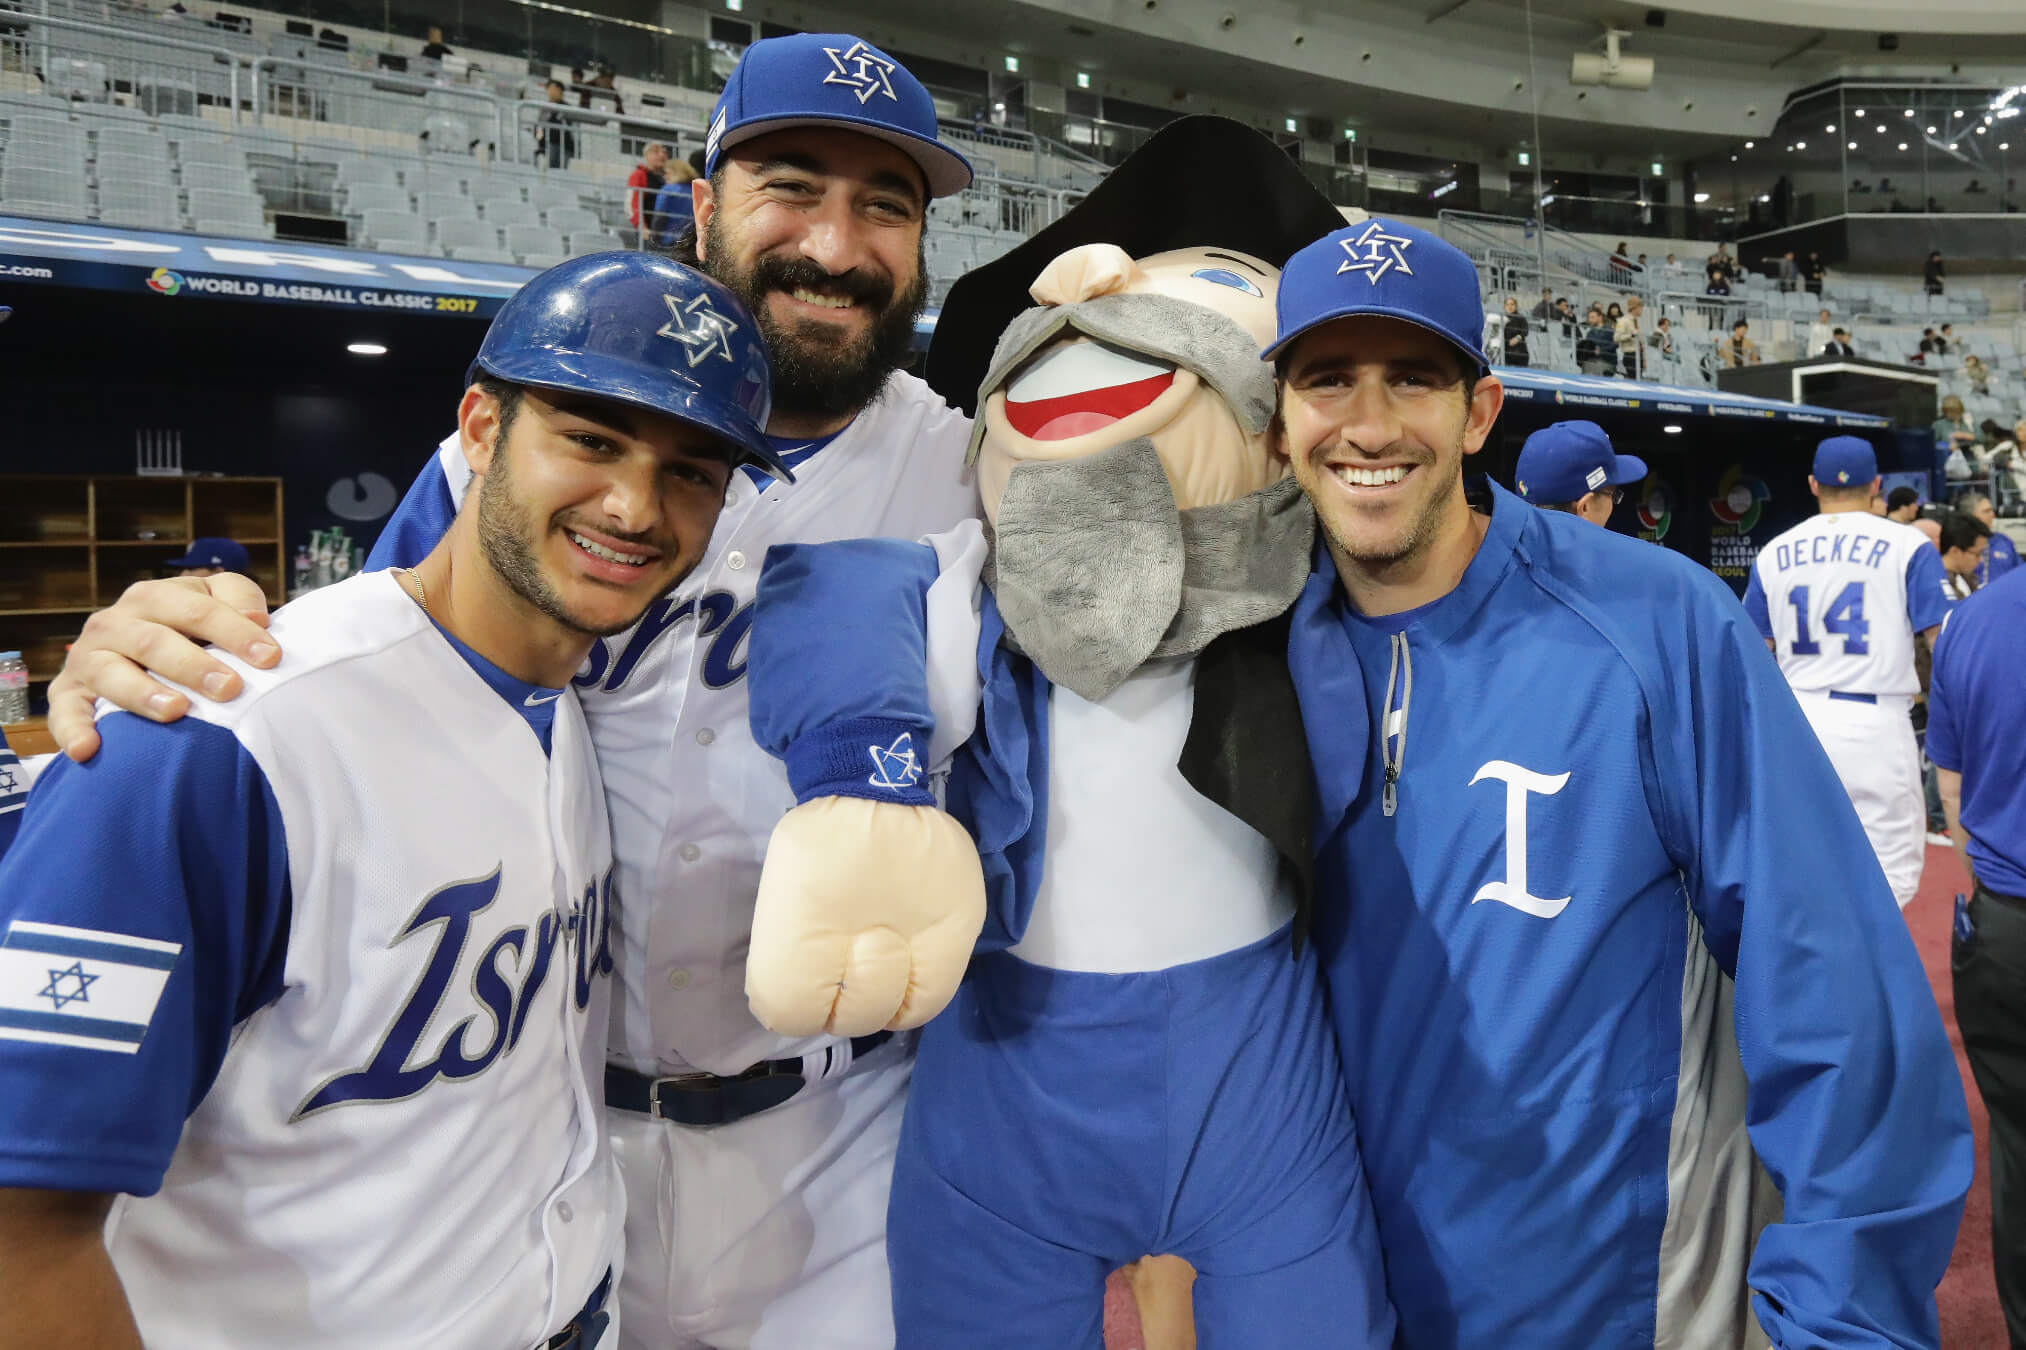 Team Israel players pose with the team mascot, The Mensch, after a victory in the World Baseball Classic in March 2017 in Seoul, South Korea.